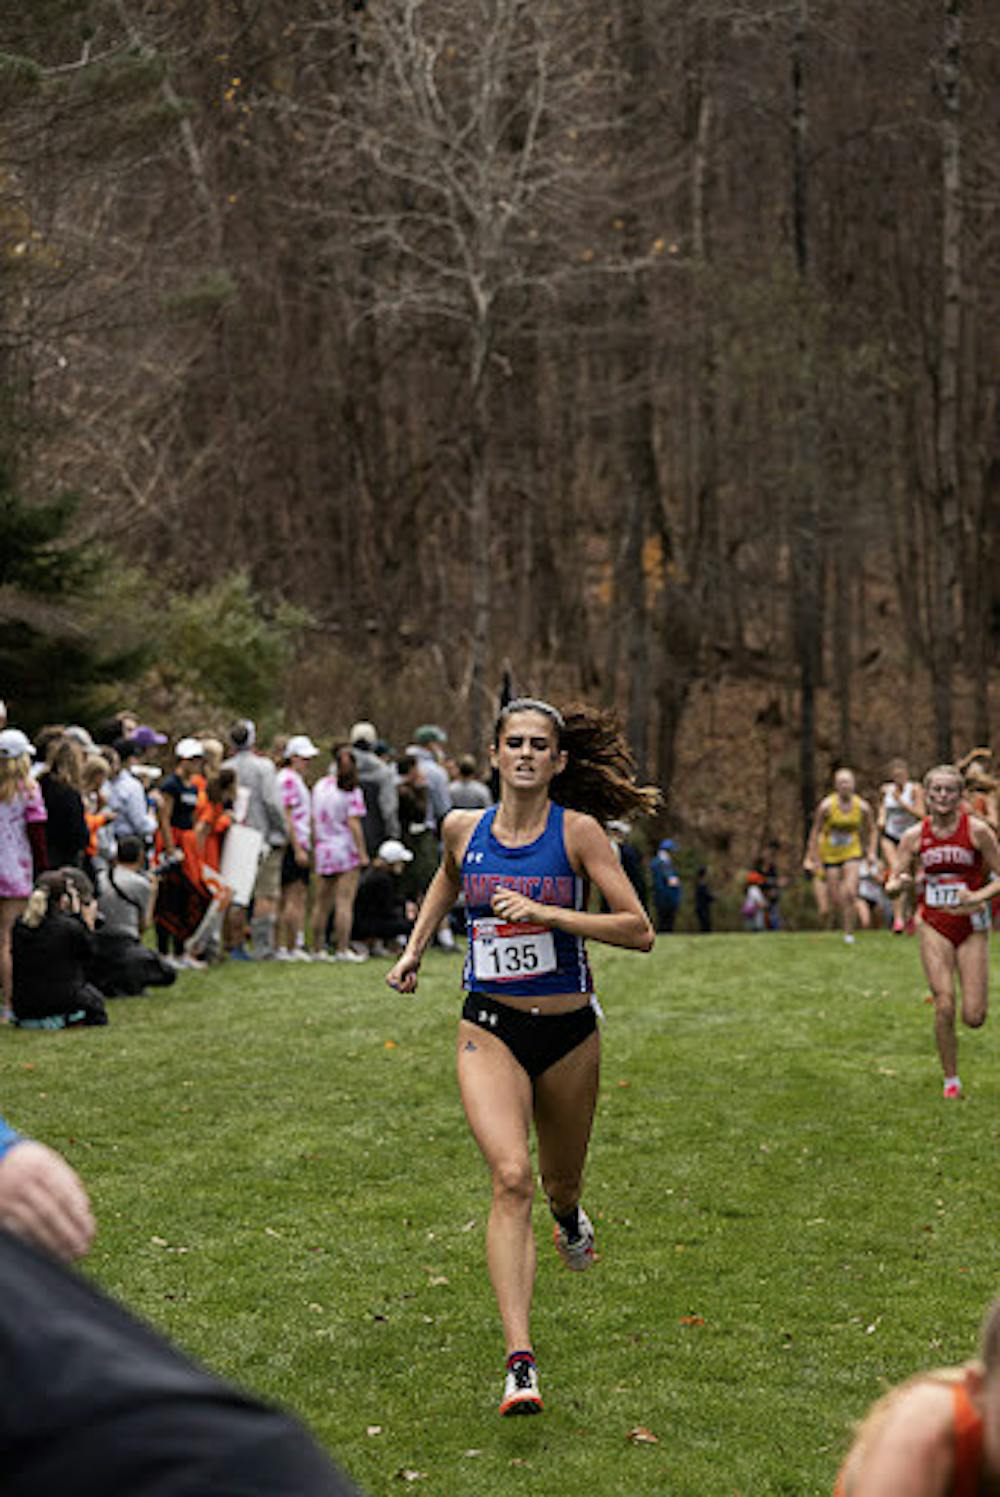 Cross country ‘missed the mark’ at Patriot League Championships